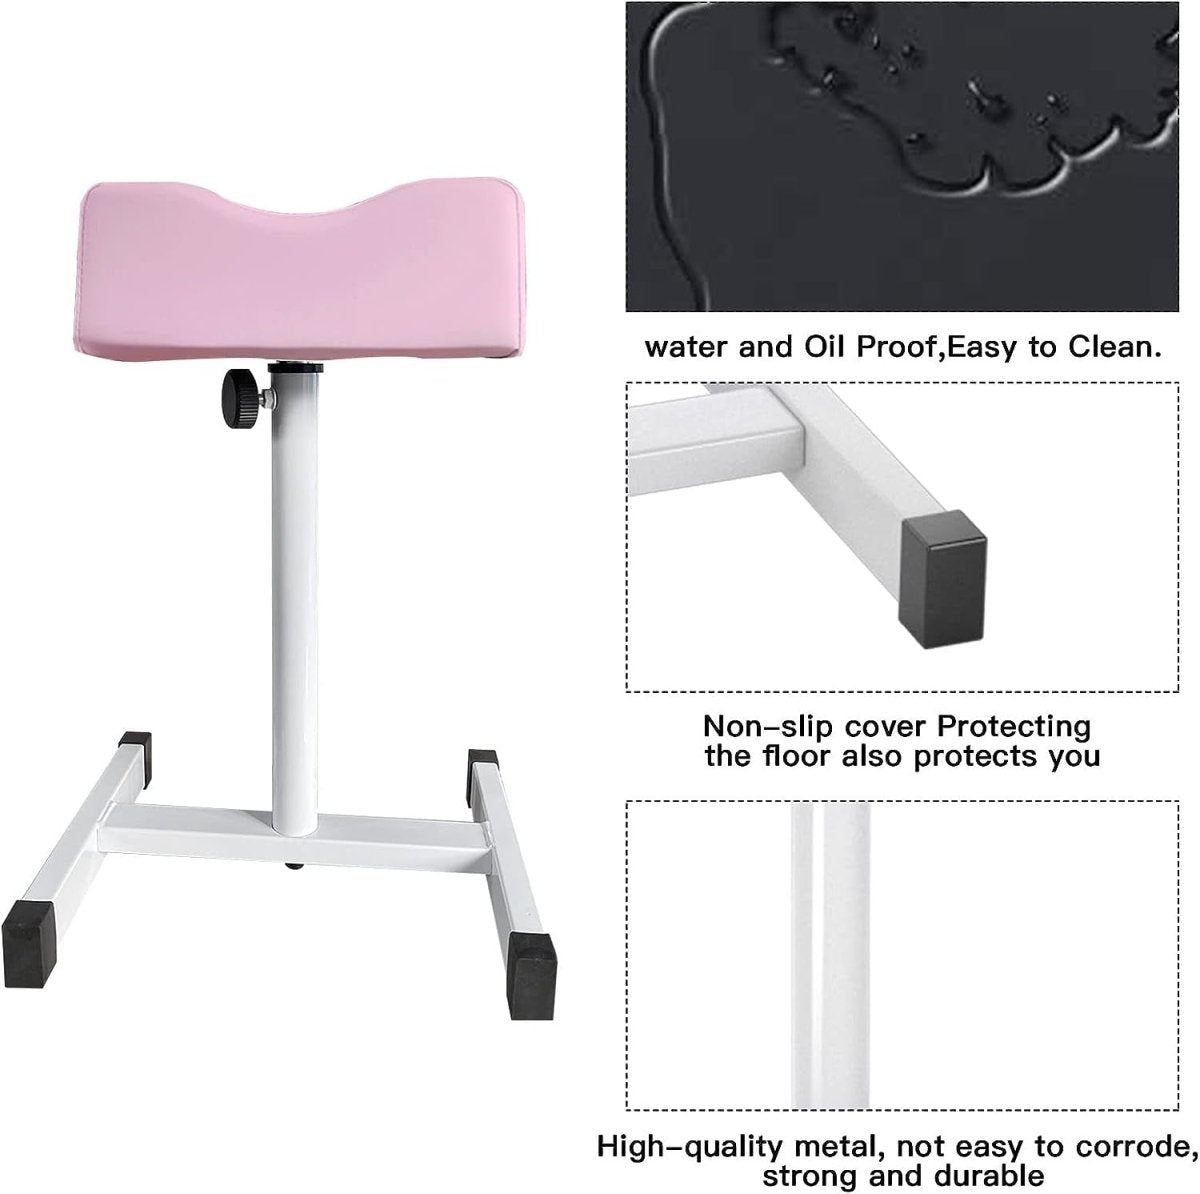 Pedicure Foot Rest Adjustable Height - Shiny Nails